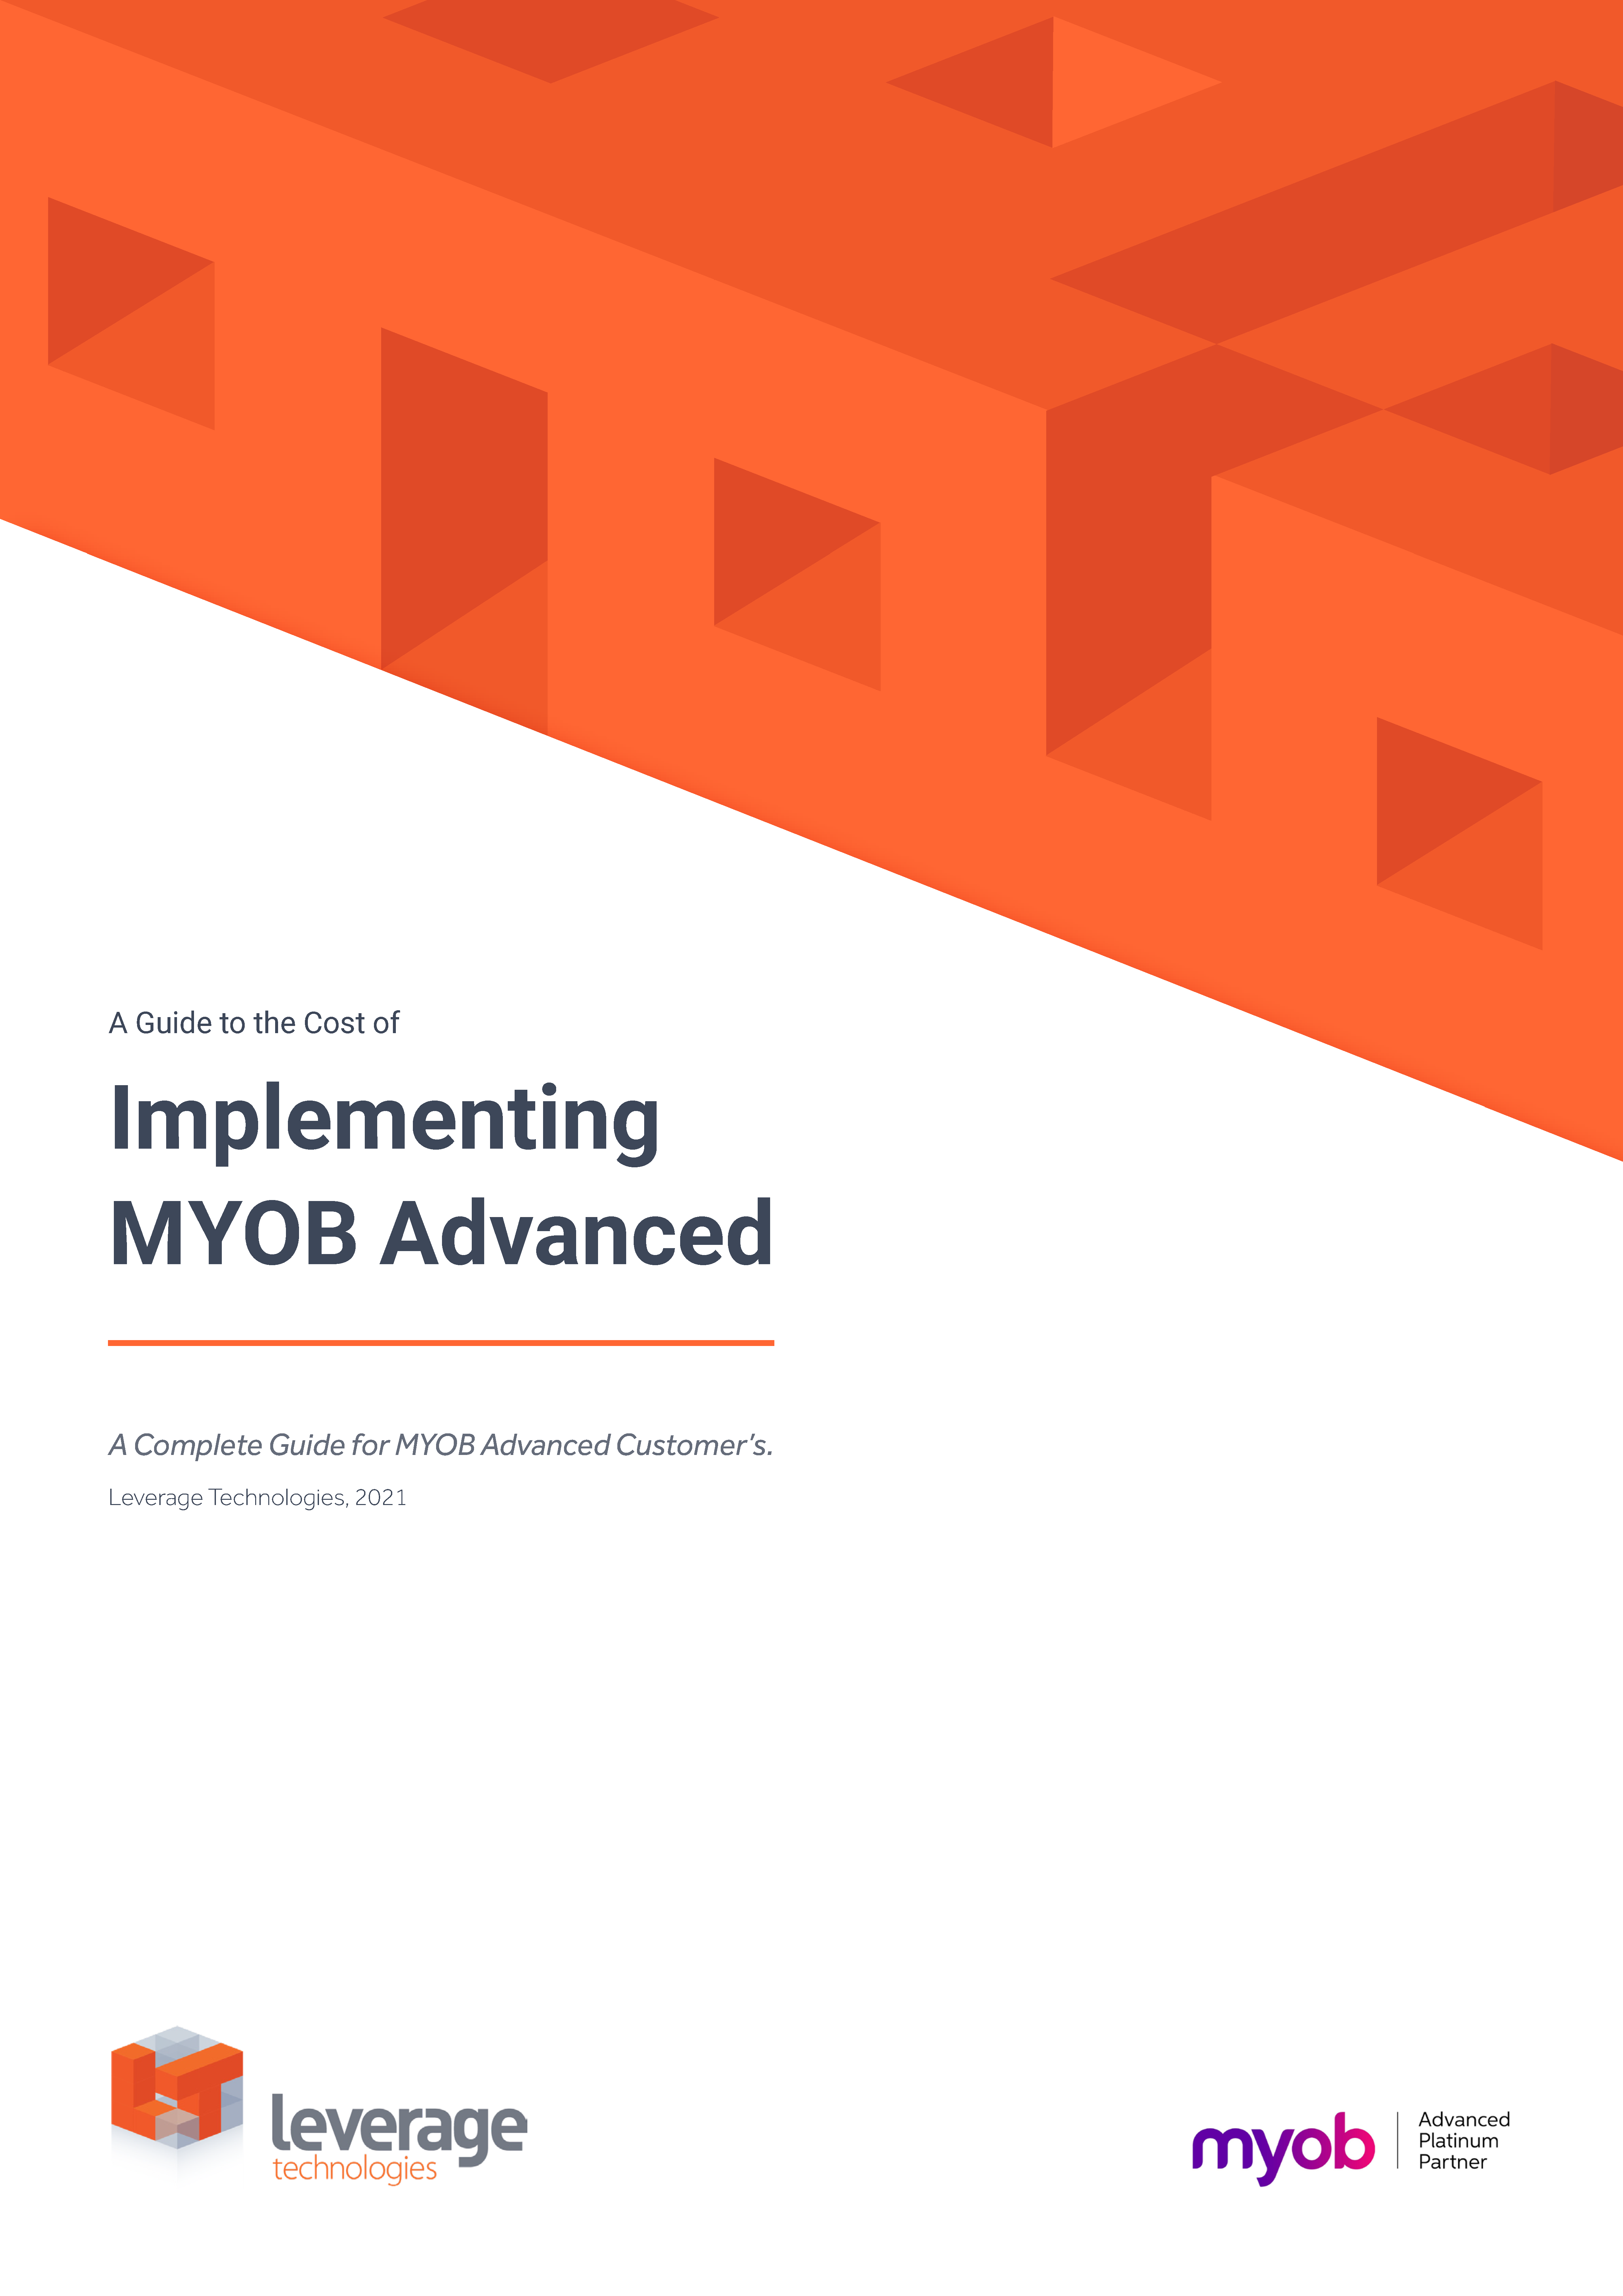 Guide to the Cost of Implementing MYOB Advanced